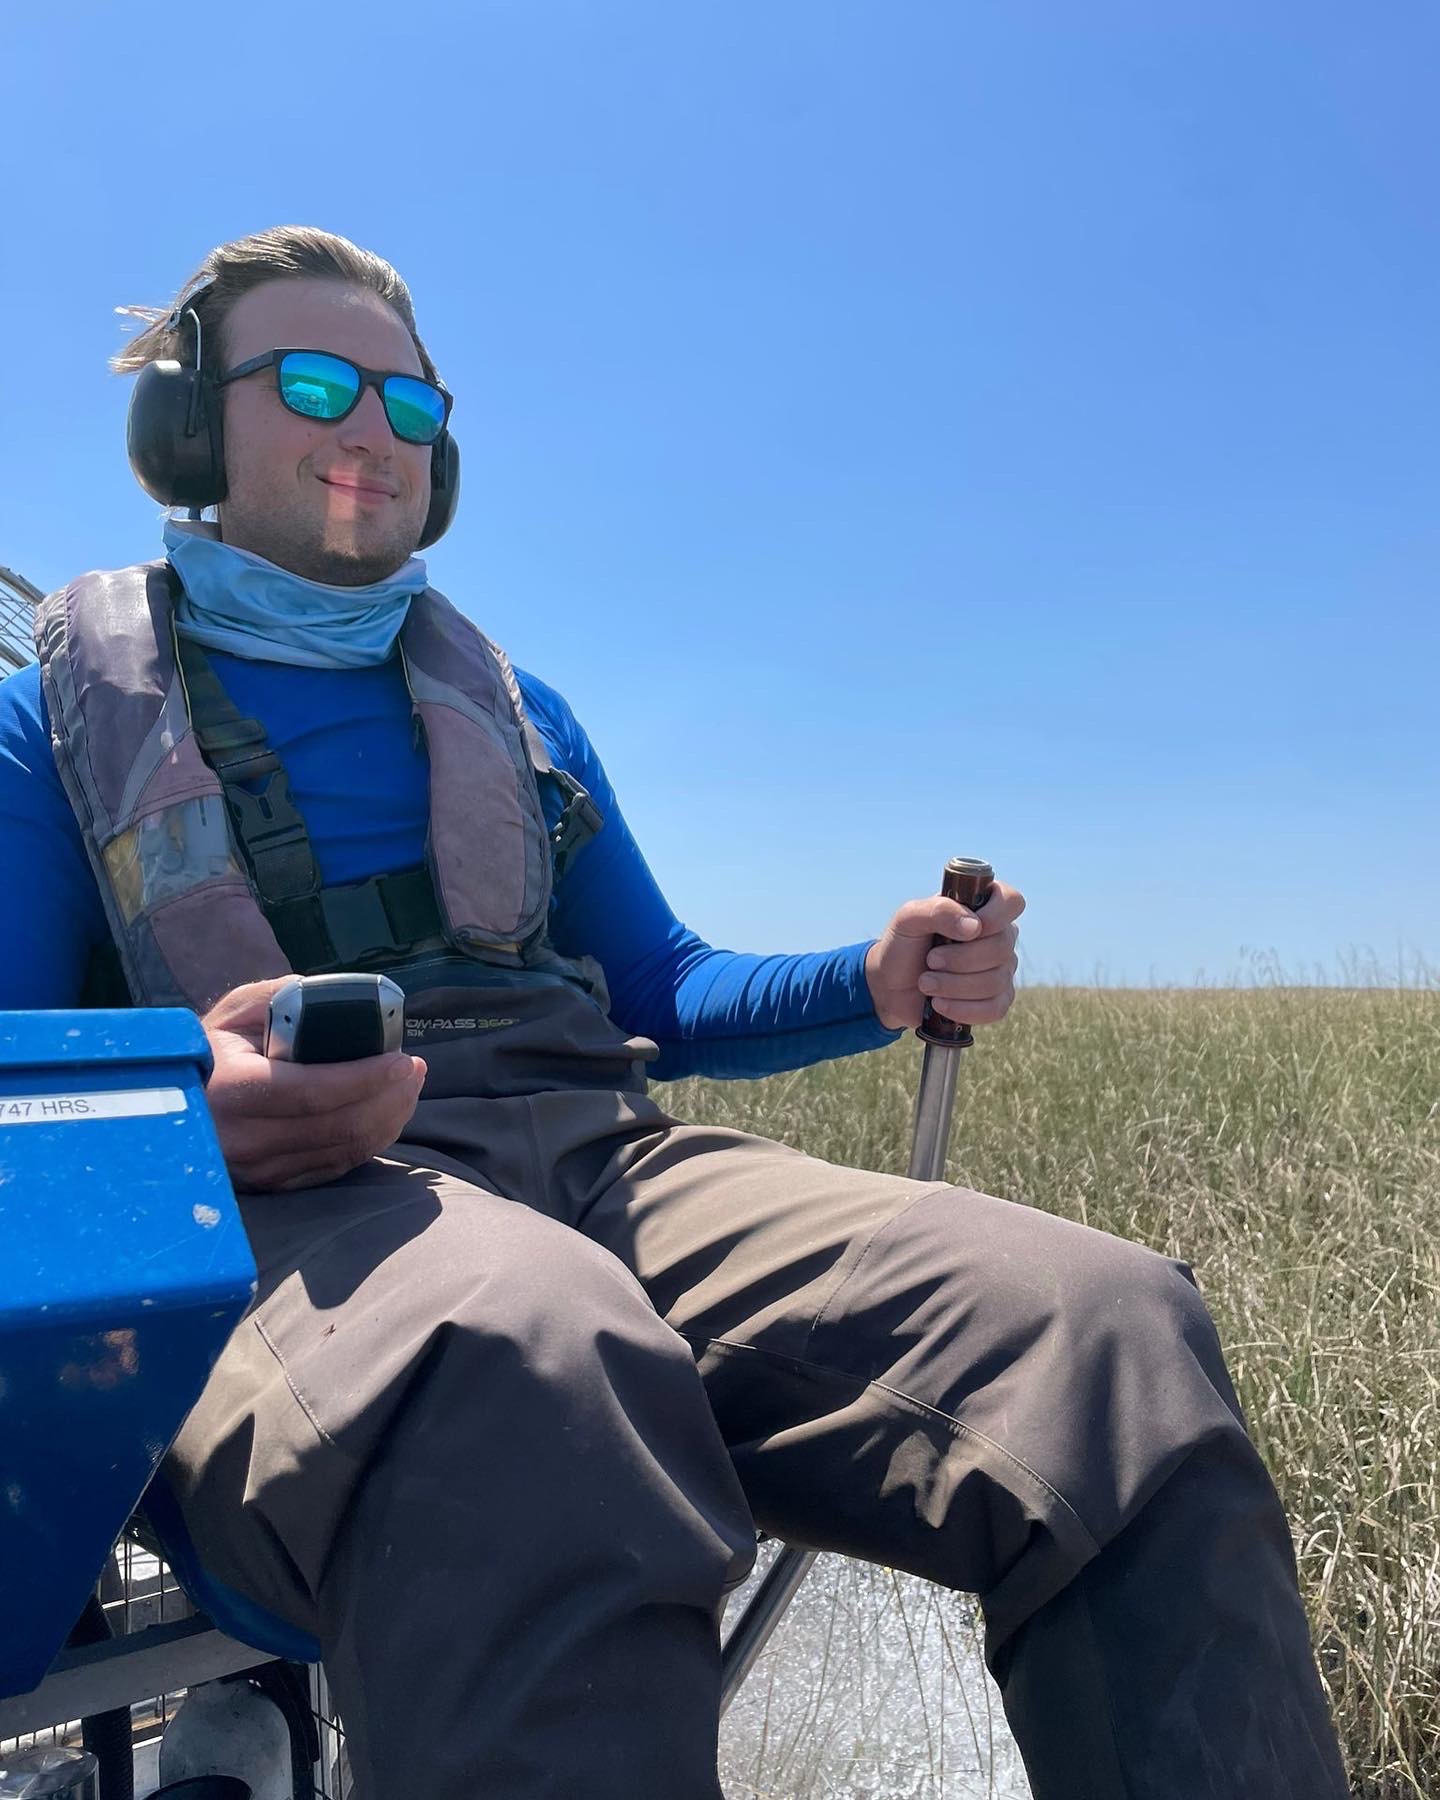 Man driving an airboat, wearing sunglasses